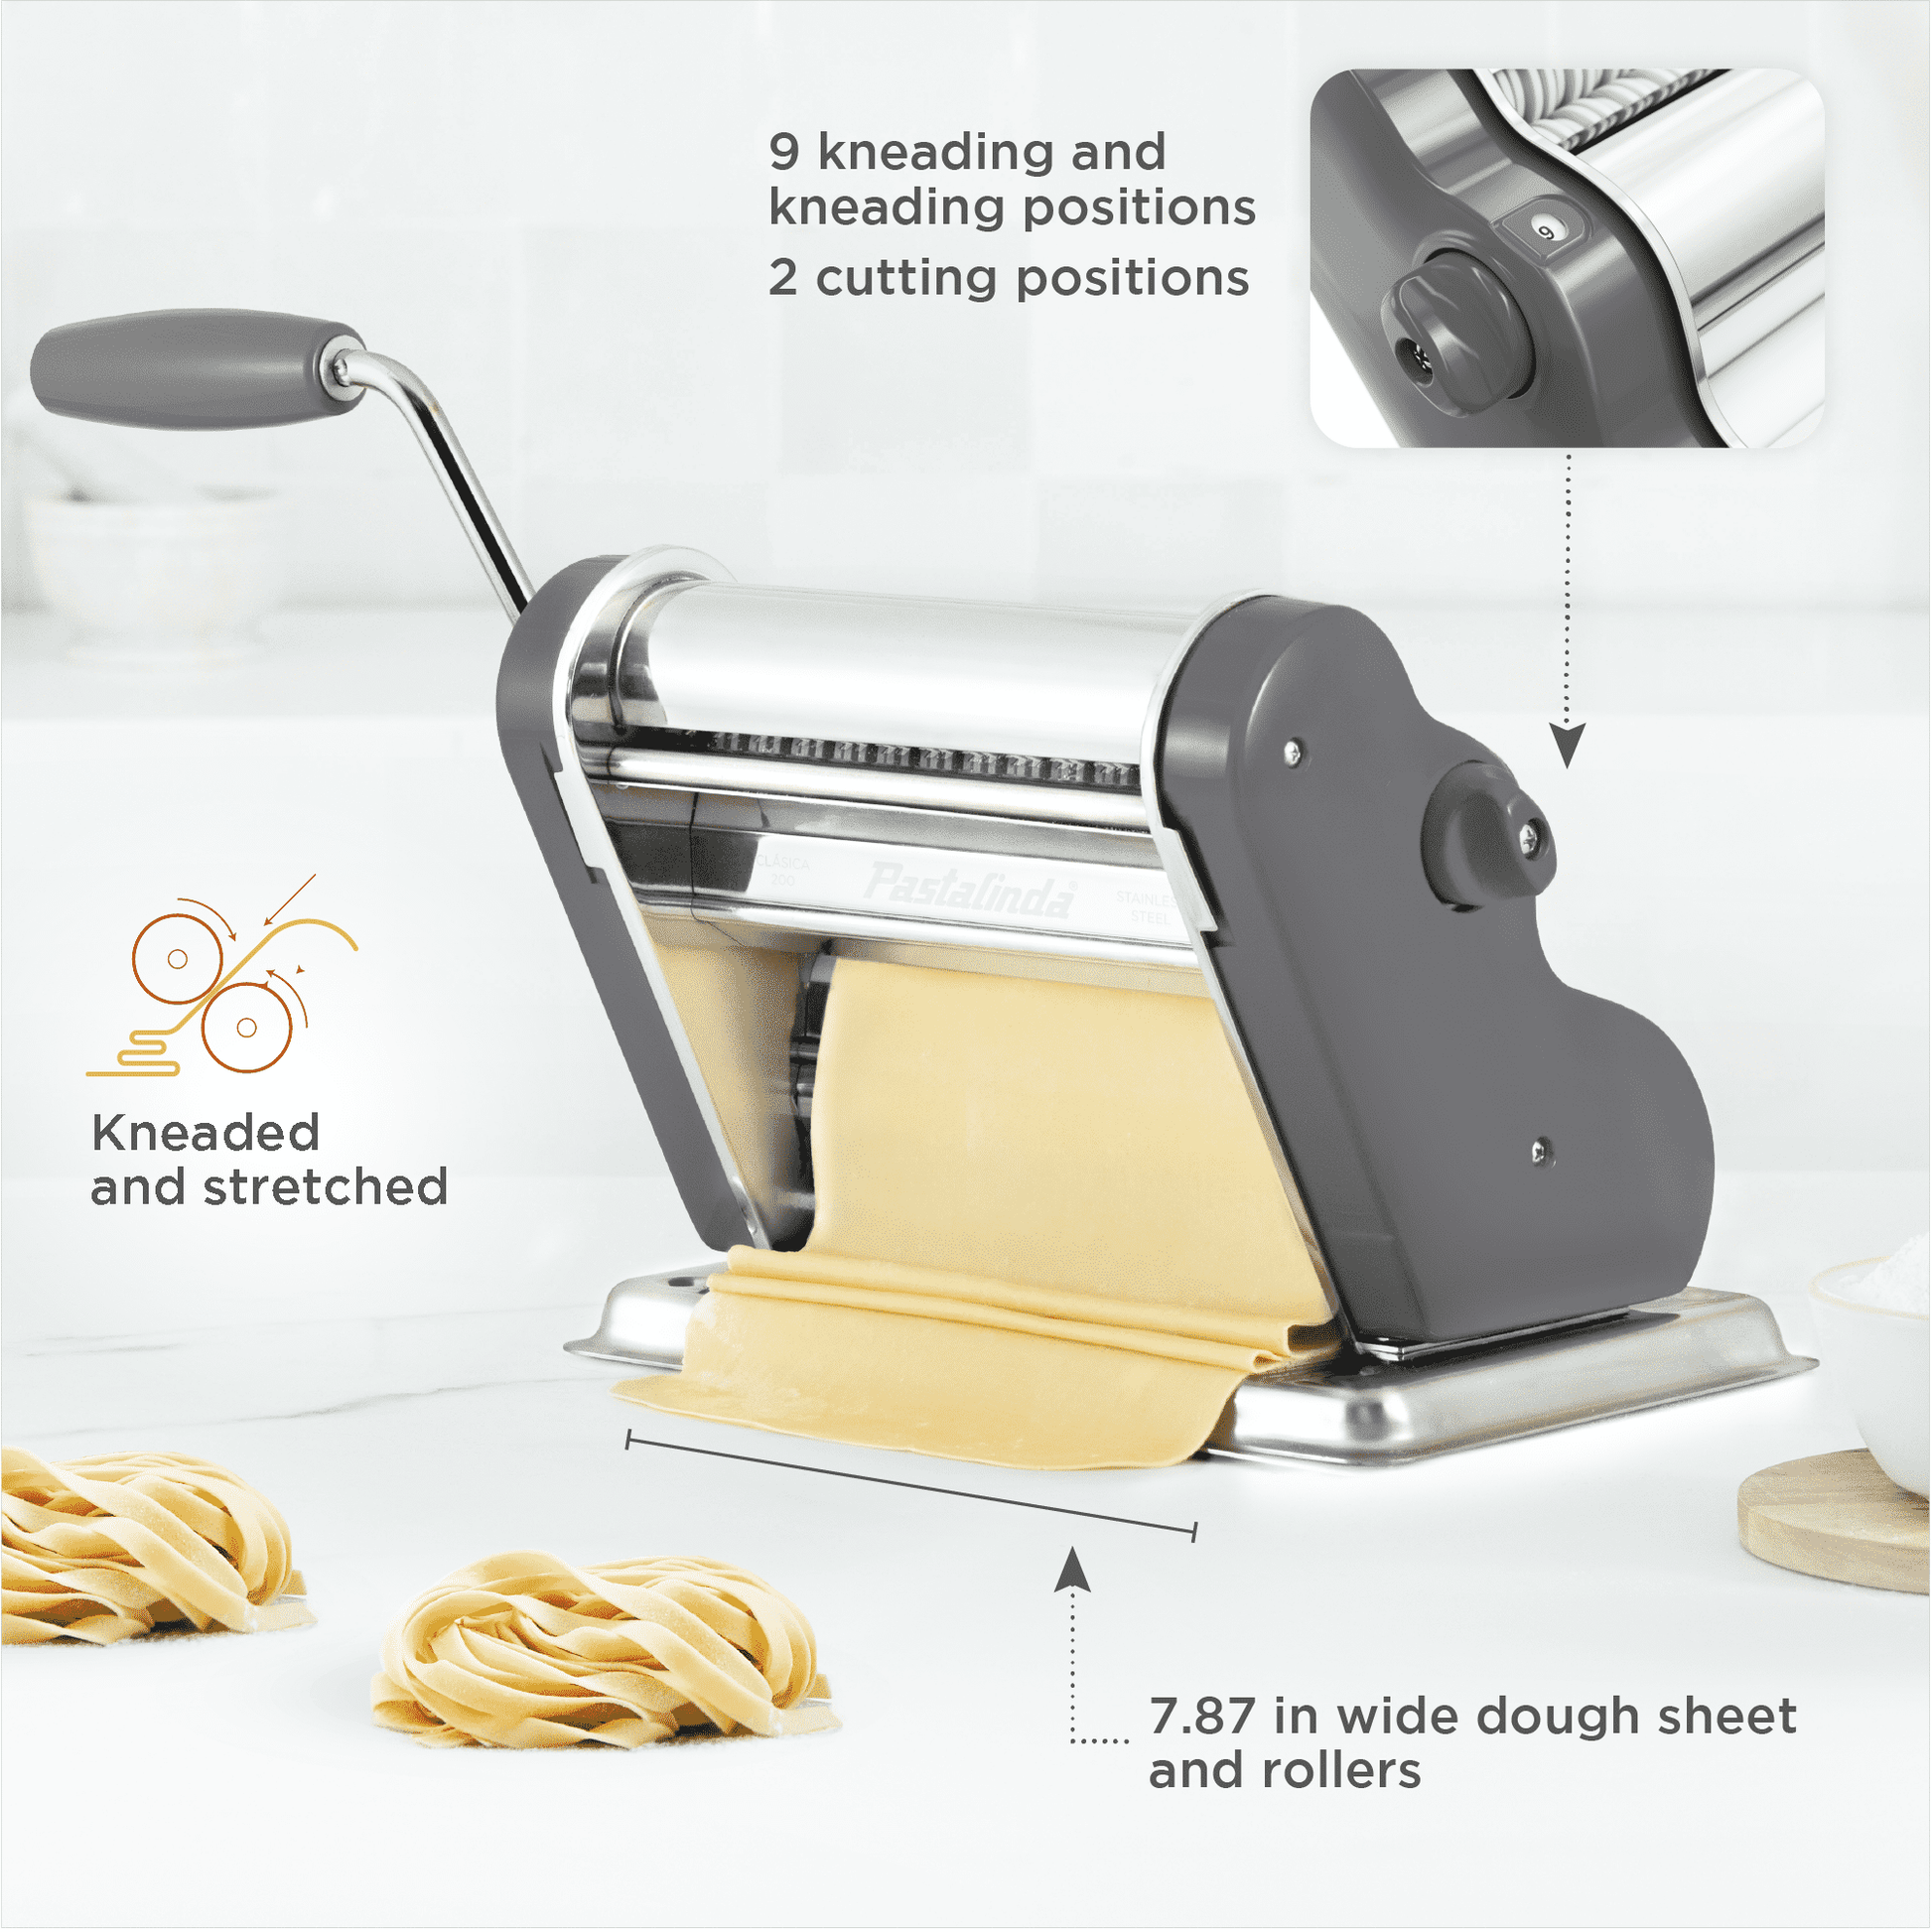 Our Favorite Affordable Pasta Maker Makes 5 Shapes, and It's on Sale